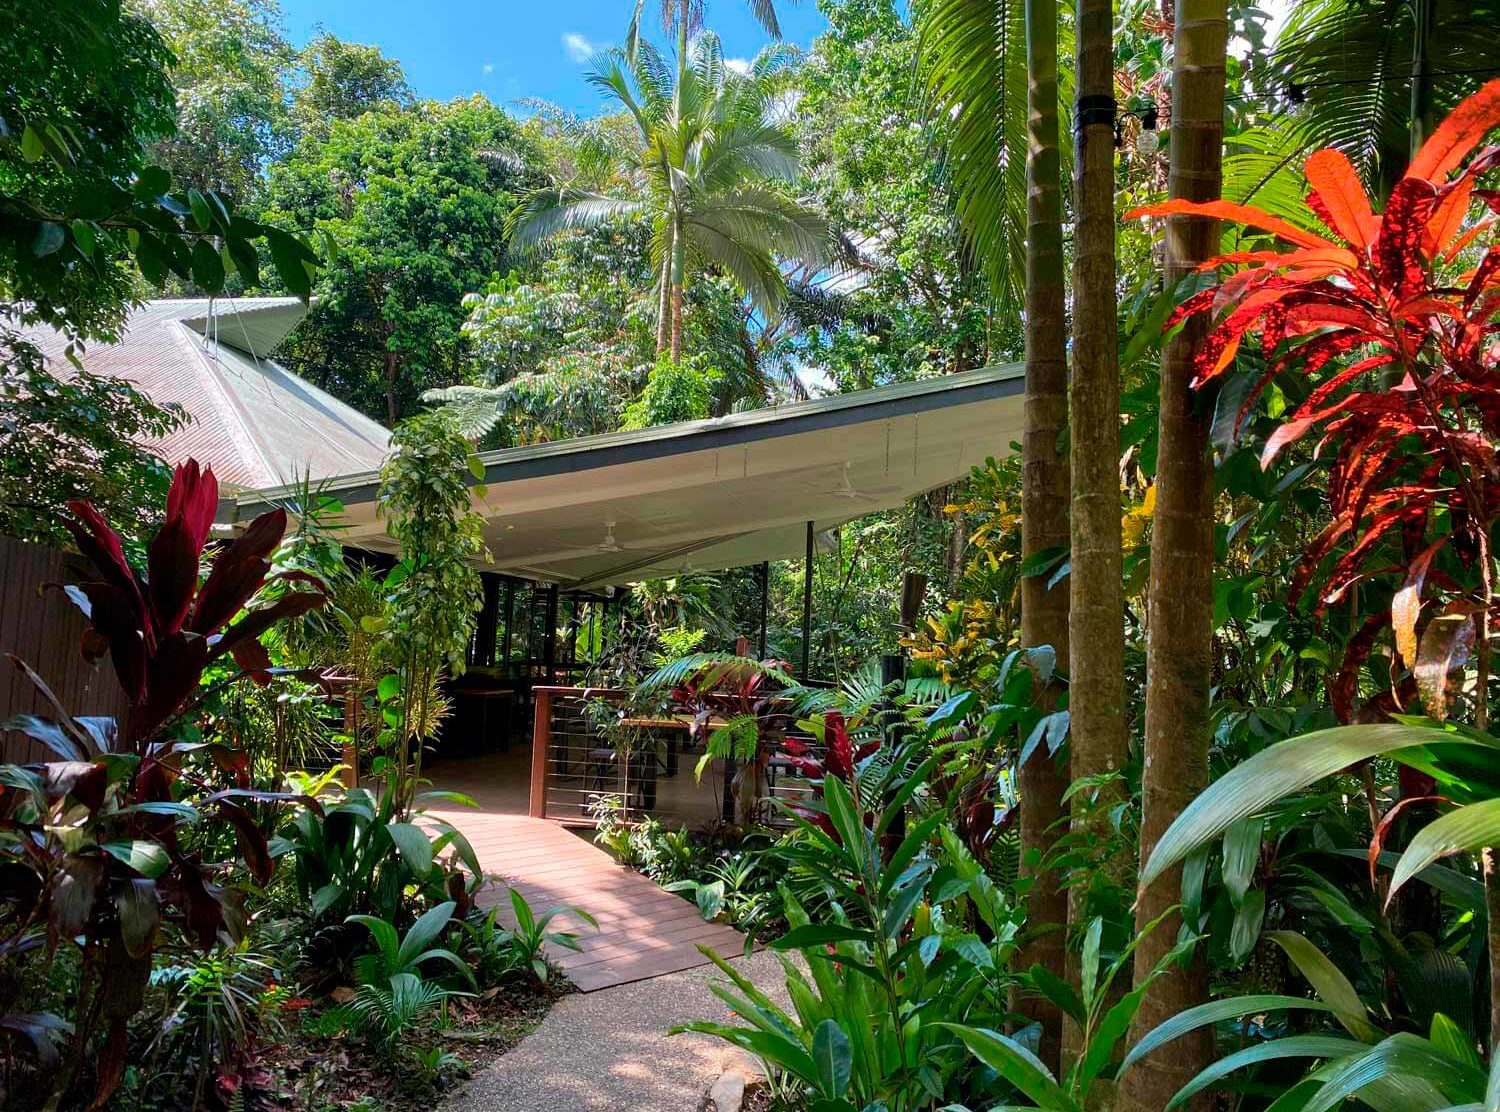 Daintree Ecolodge It is a carbon neutral property with Greenfleet offsetting, meaning all carbon emissions are compensated for by funding native reforestation projects. All materials are recycled where possible and they are constantly exploring ways to improve on this. 